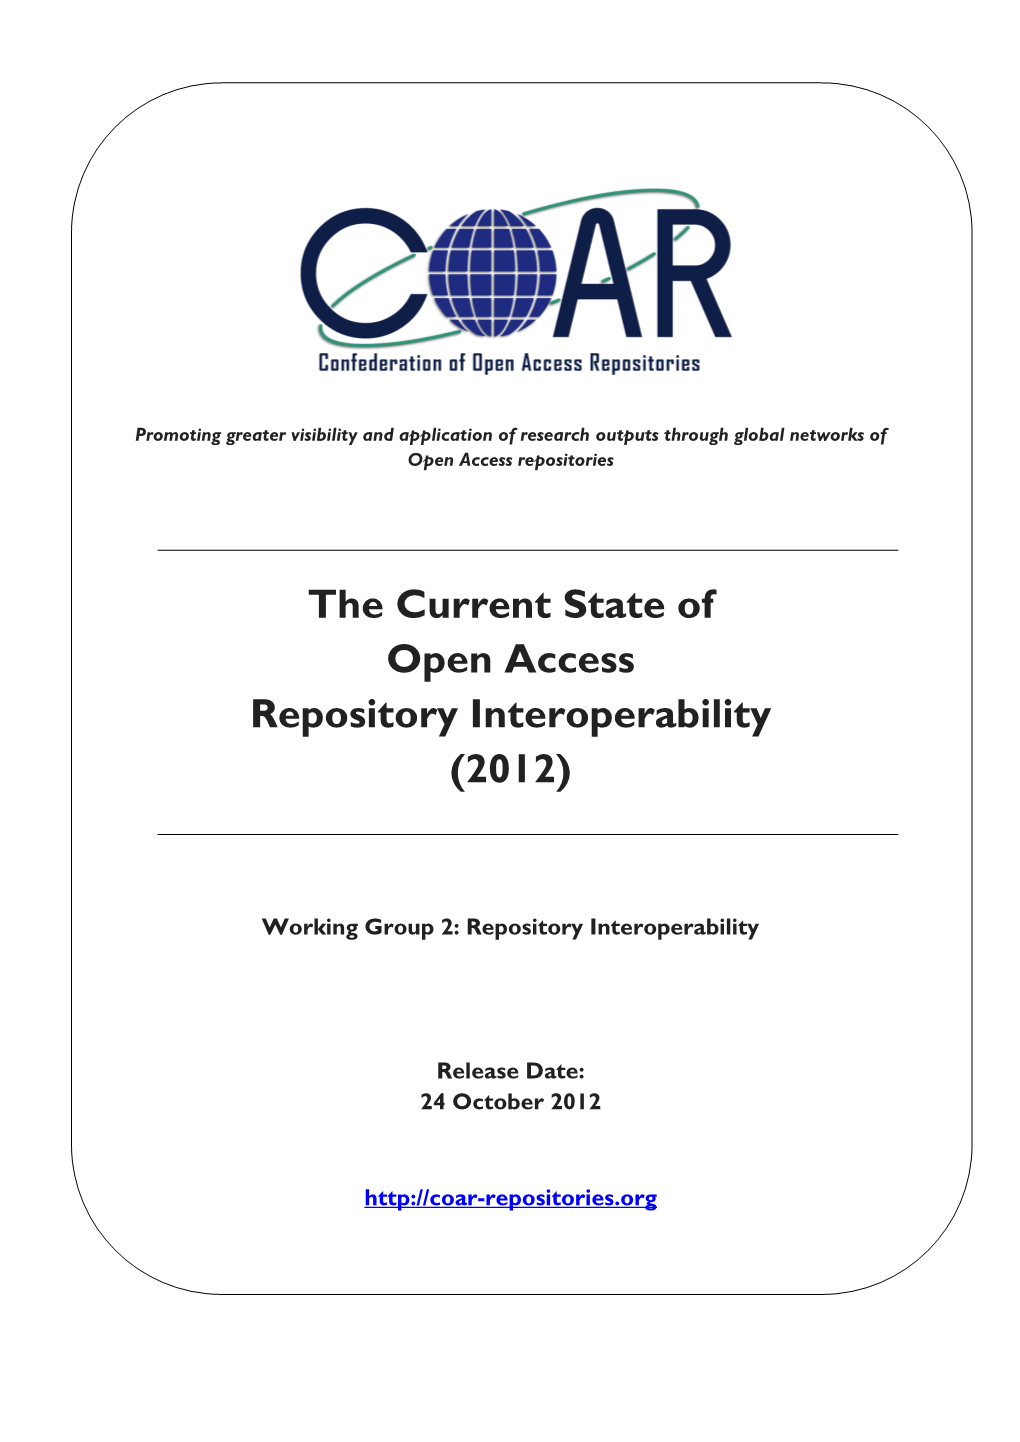 The Current State of Open Access Repository Interoperability (2012)